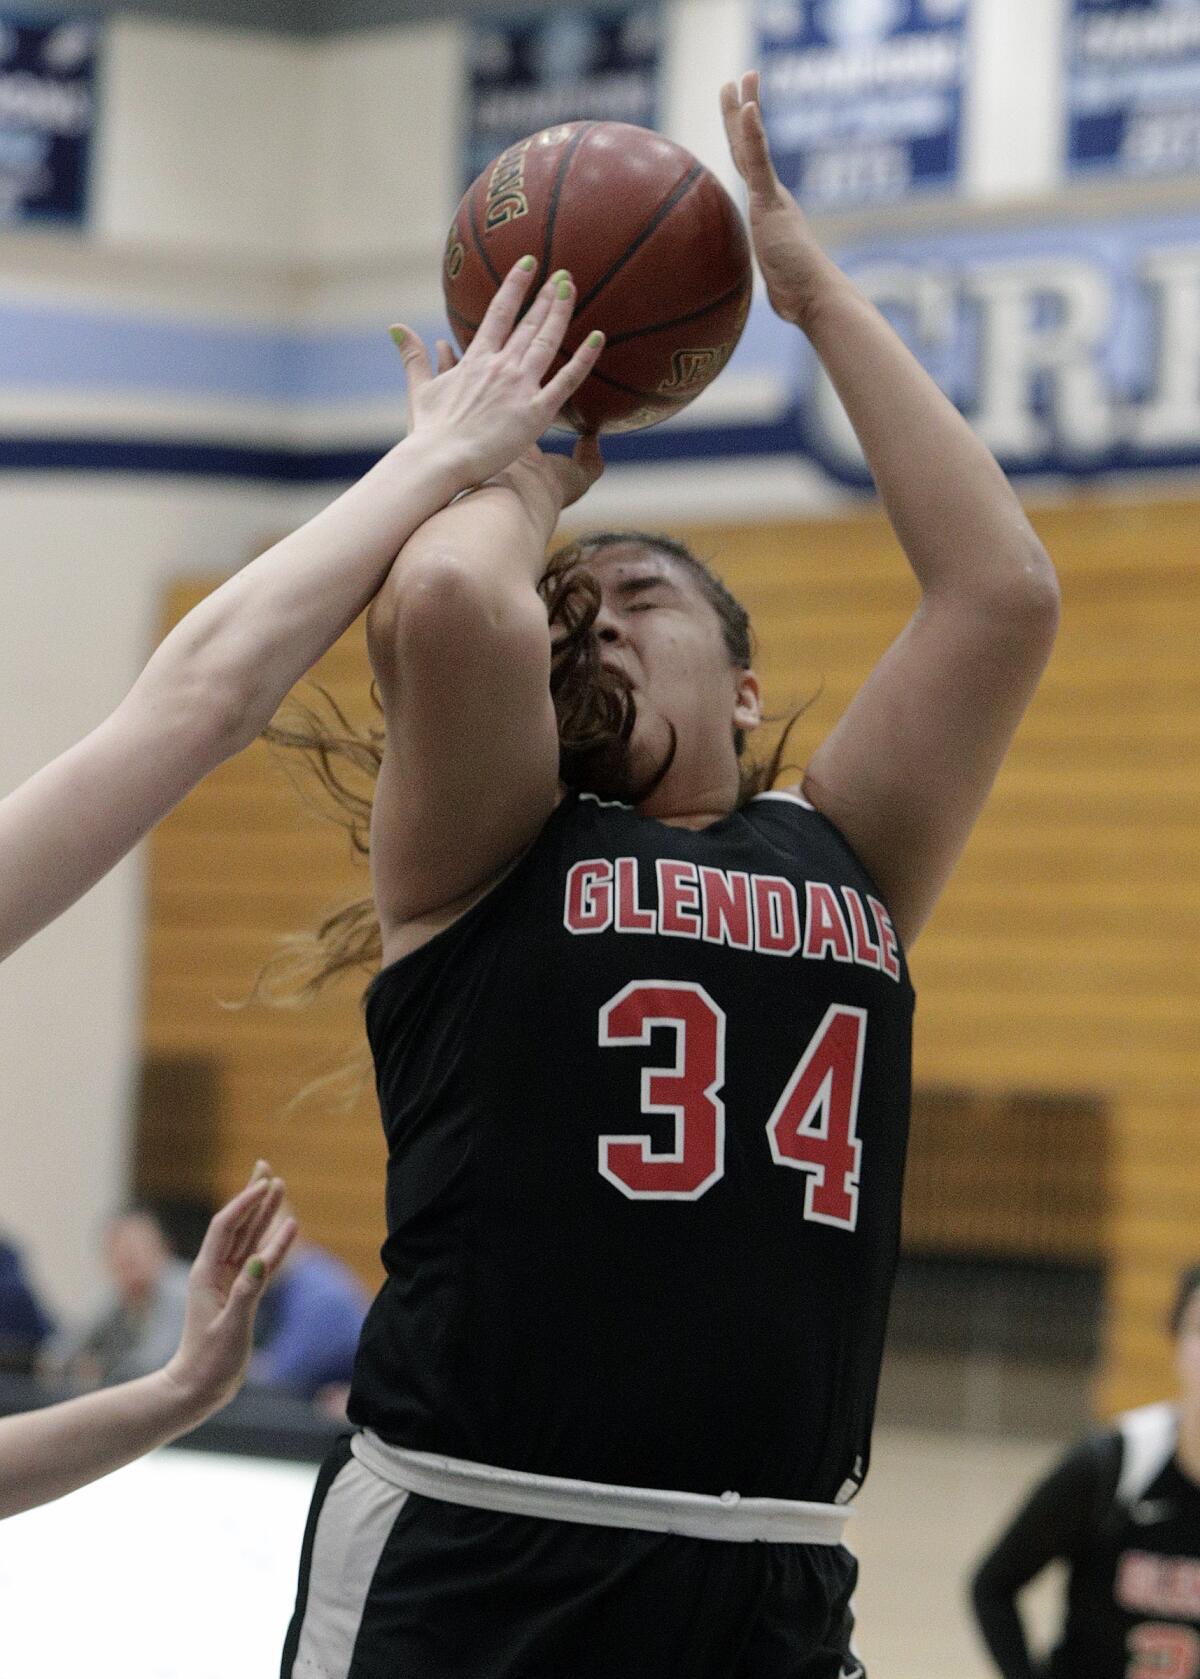 Glendale's Melissa Zamora shoots while being fouled by Crescenta Valley in a Pacific League girls' basketball game at Crescenta Valley High School on Tuesday, January 7, 2020.